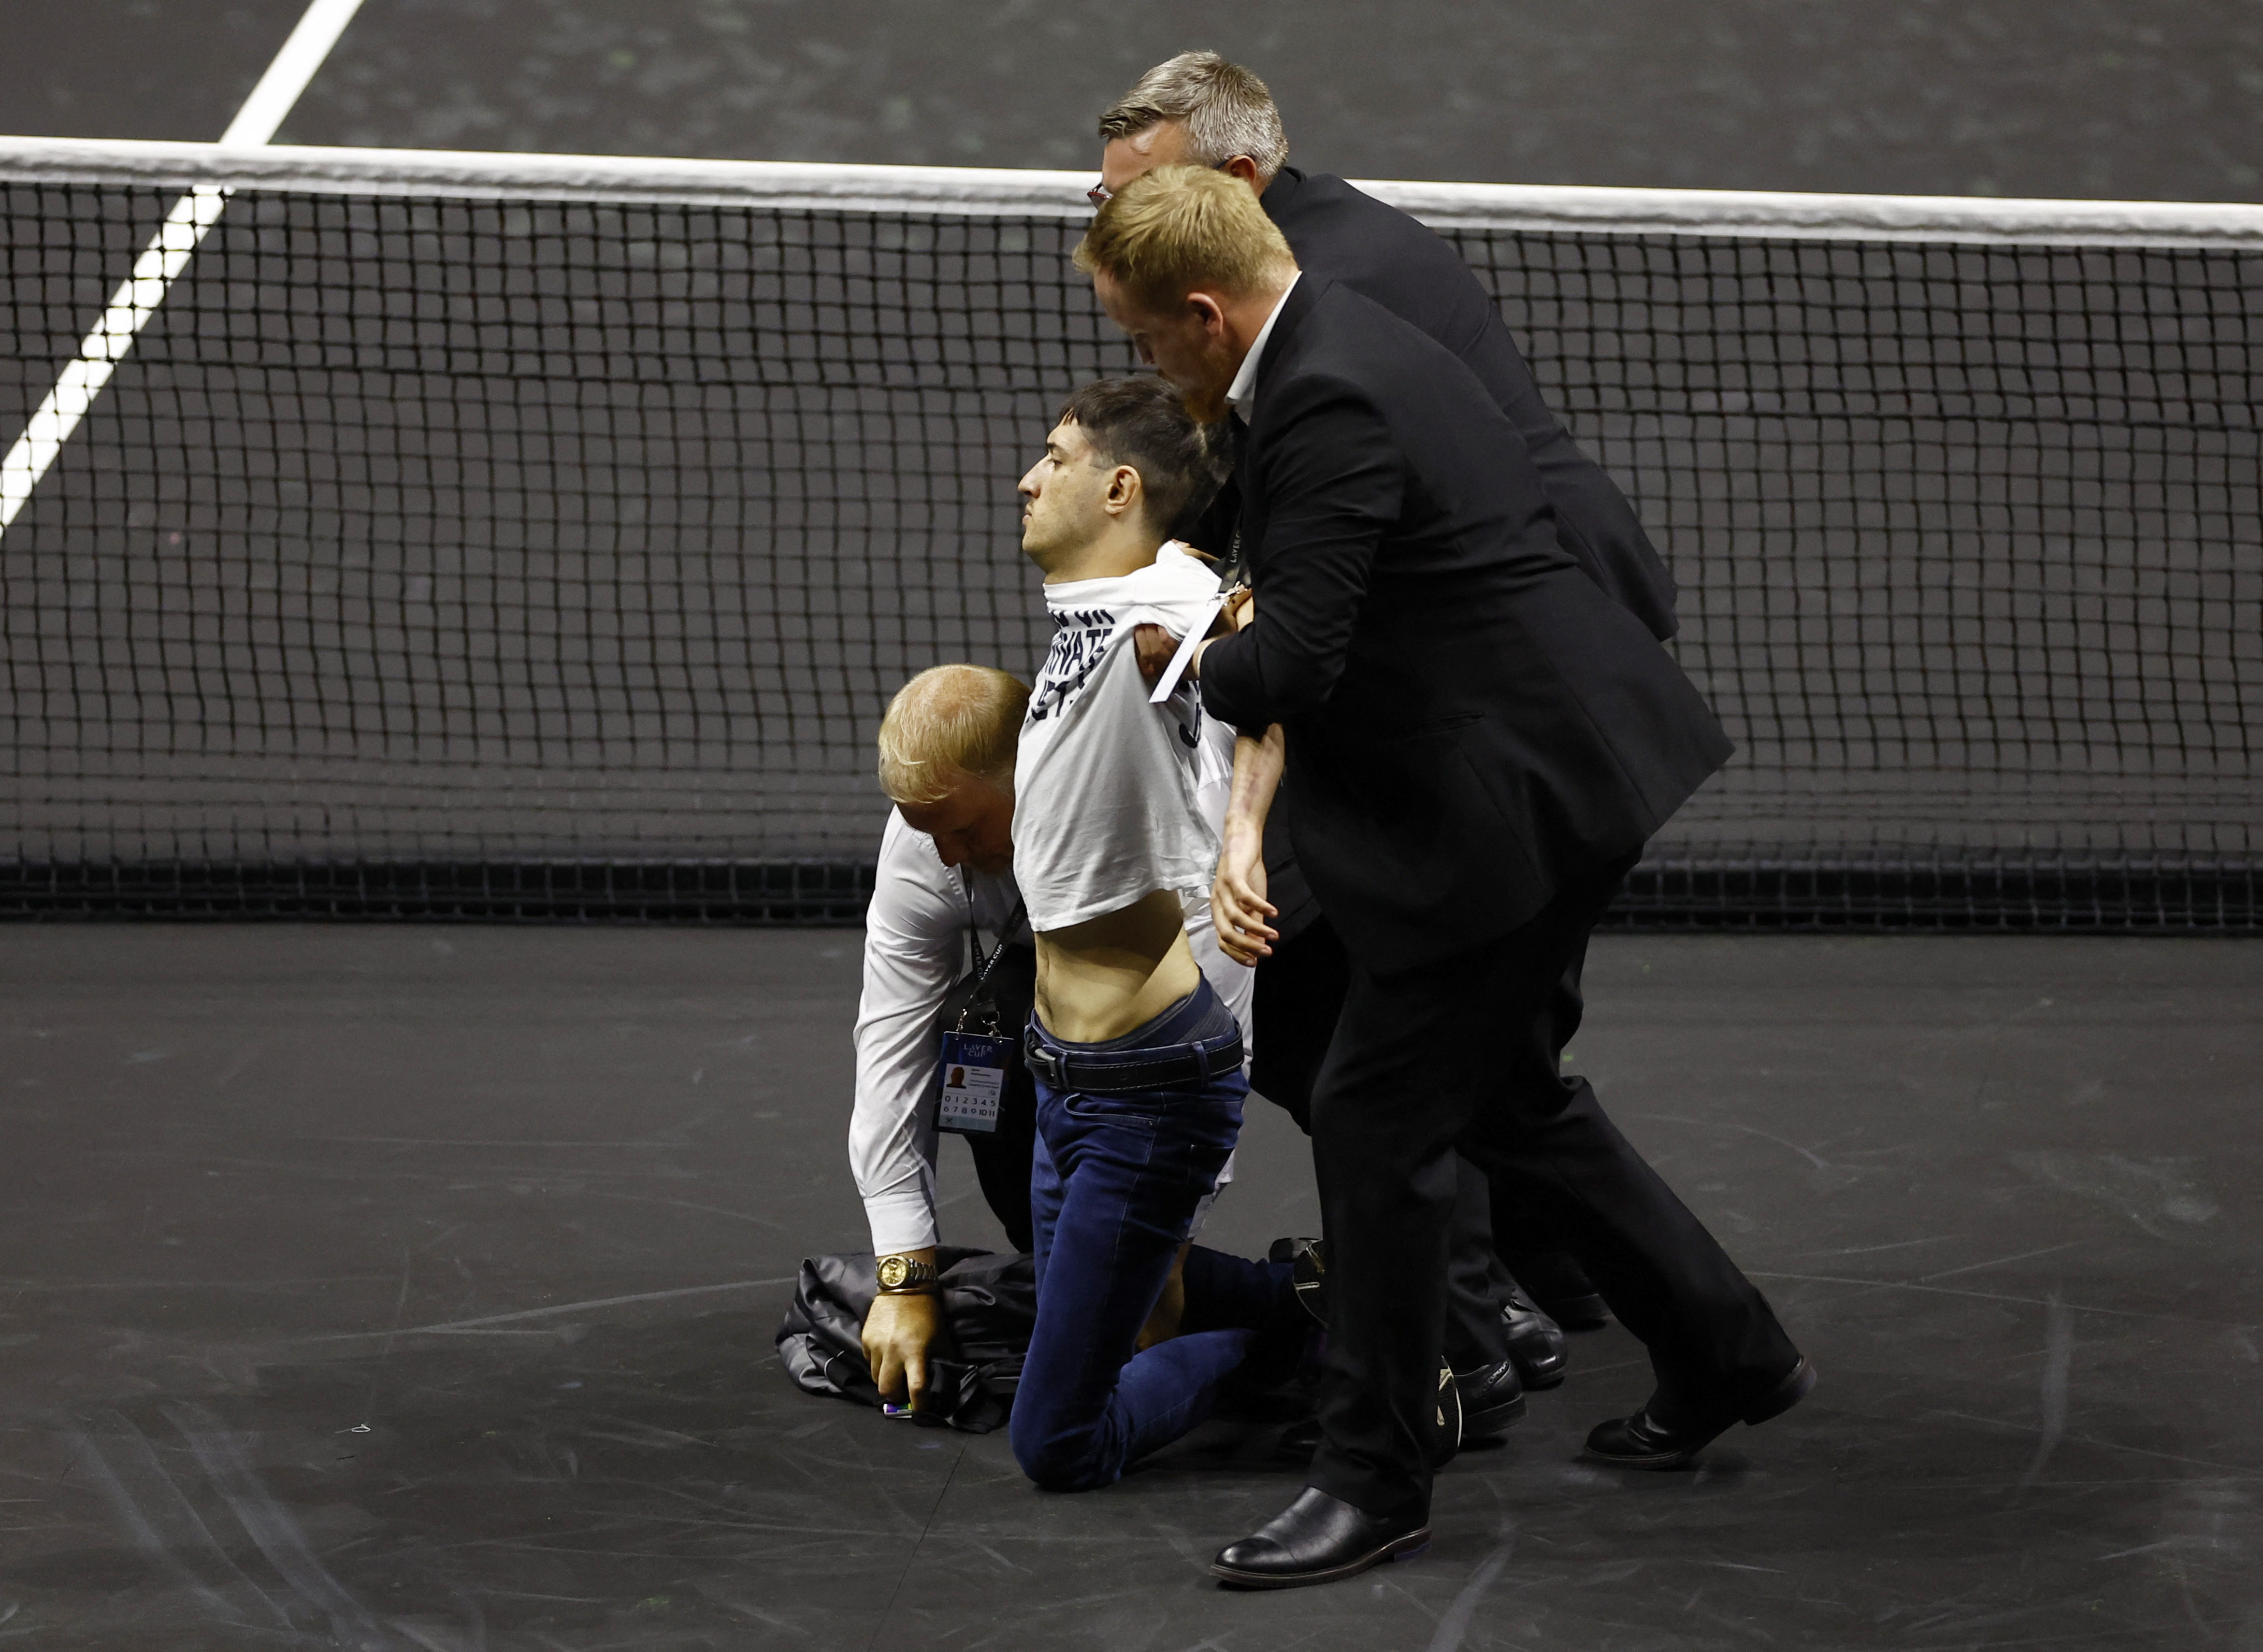 Tennis - Laver Cup - 02 Arena, London, Britain - September 23, 2022   A protester is removed from the court during the match between Team Europe's Stefanos Tsitsipas and Team World's Diego Schwartzman Action Images via Reuters/Andrew Boyers